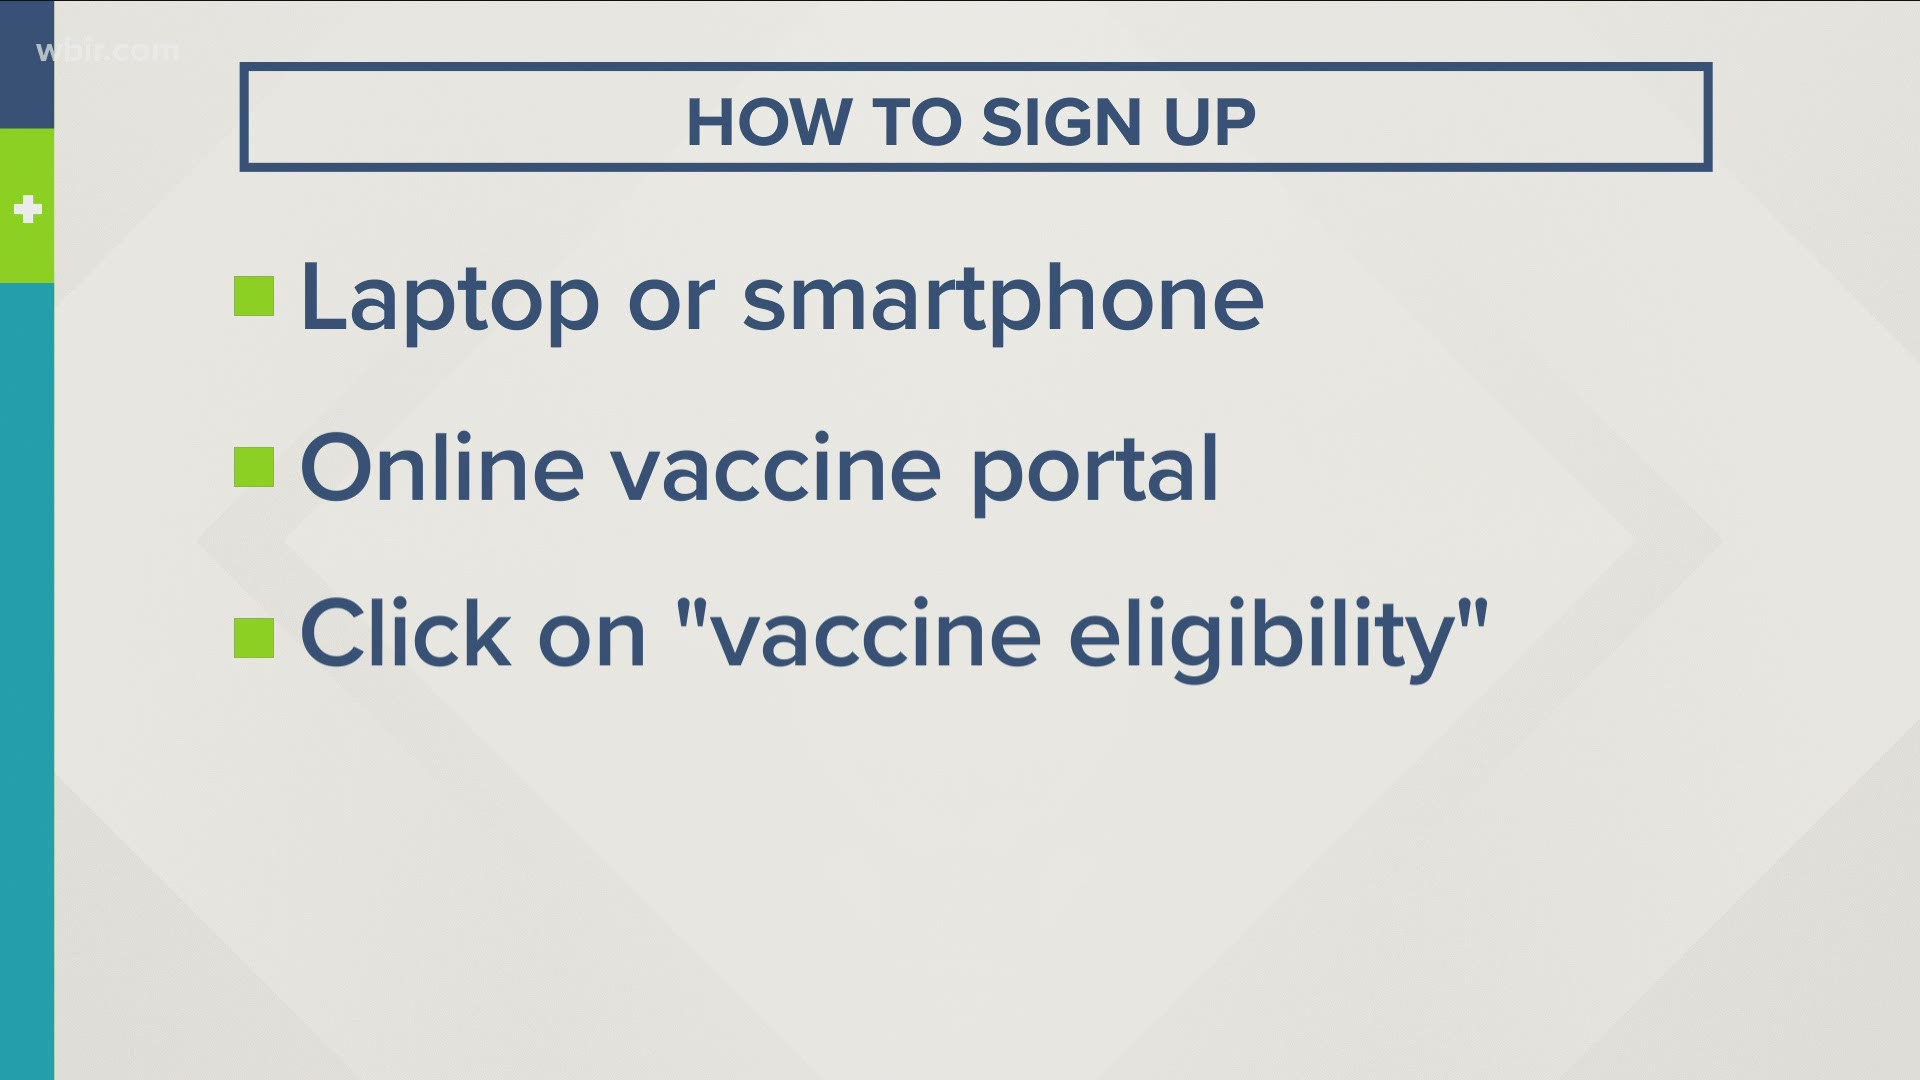 As more people are eligible to get the COVID-19 vaccine, we know that many are still struggling to sign up. Here are some tips to help.